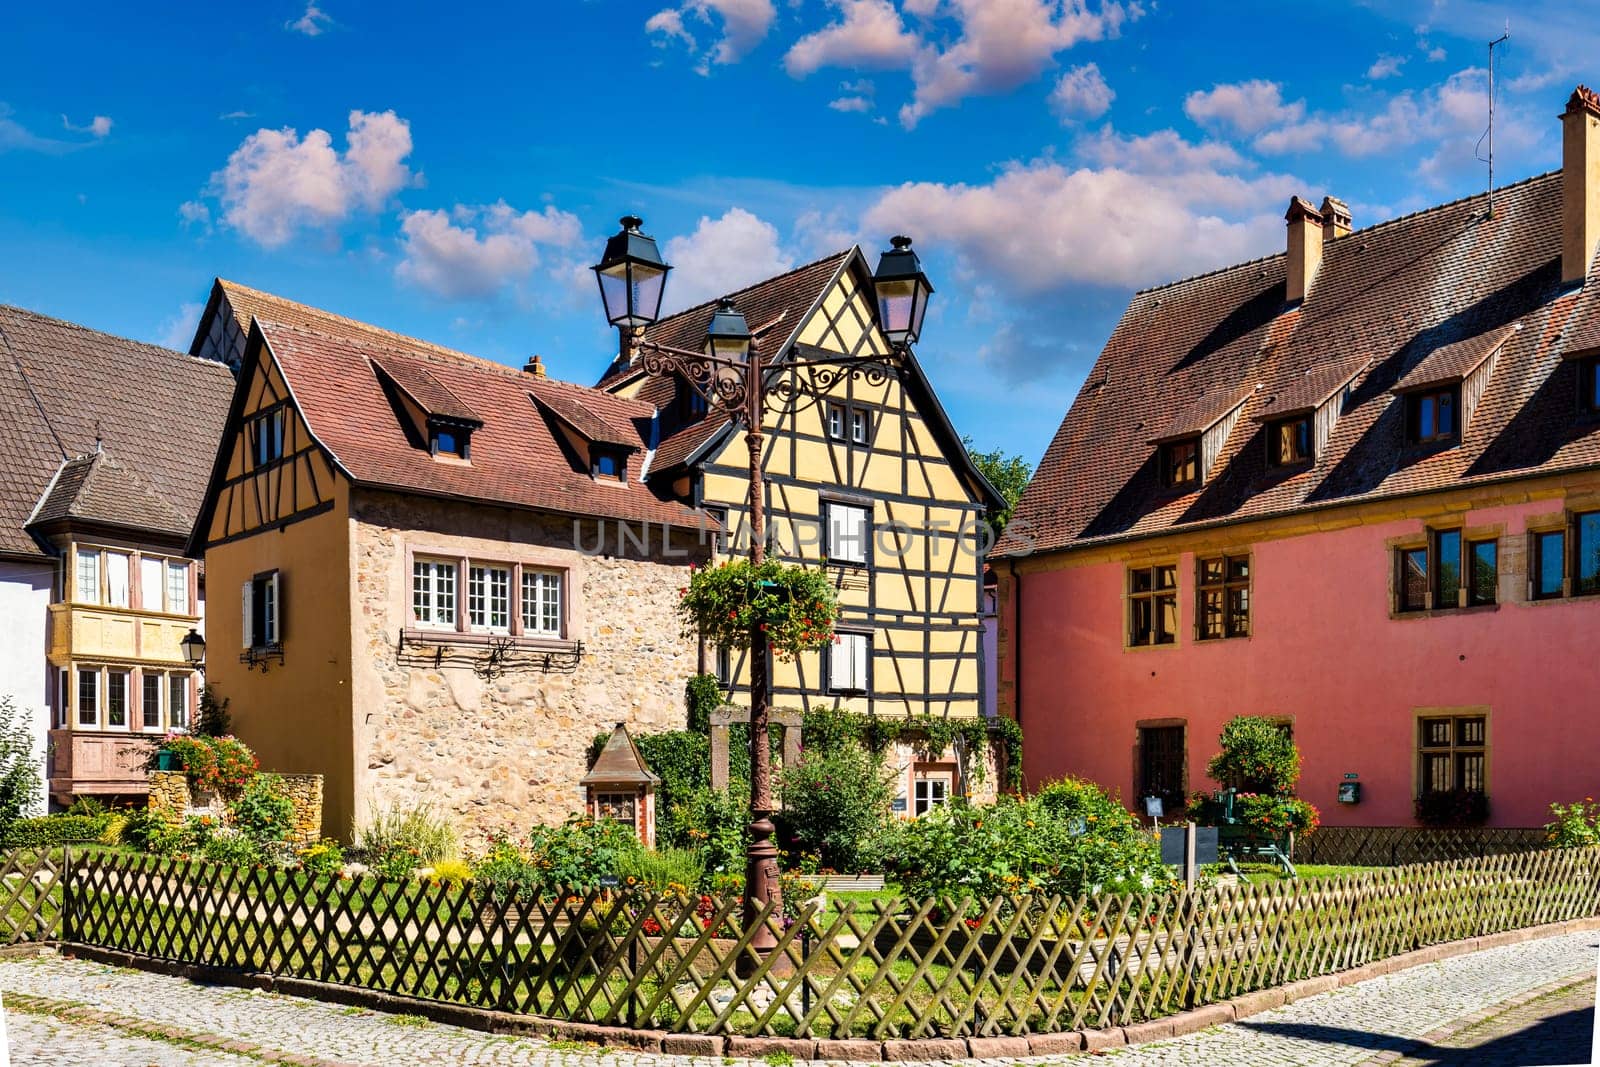 Traditional timbered house in Turckheim, Alsace, France. One of the famous cities in Alsace scenic route near Colmar, France. Colorful traditional french houses in Turckheim town of Alsace, France. by DaLiu